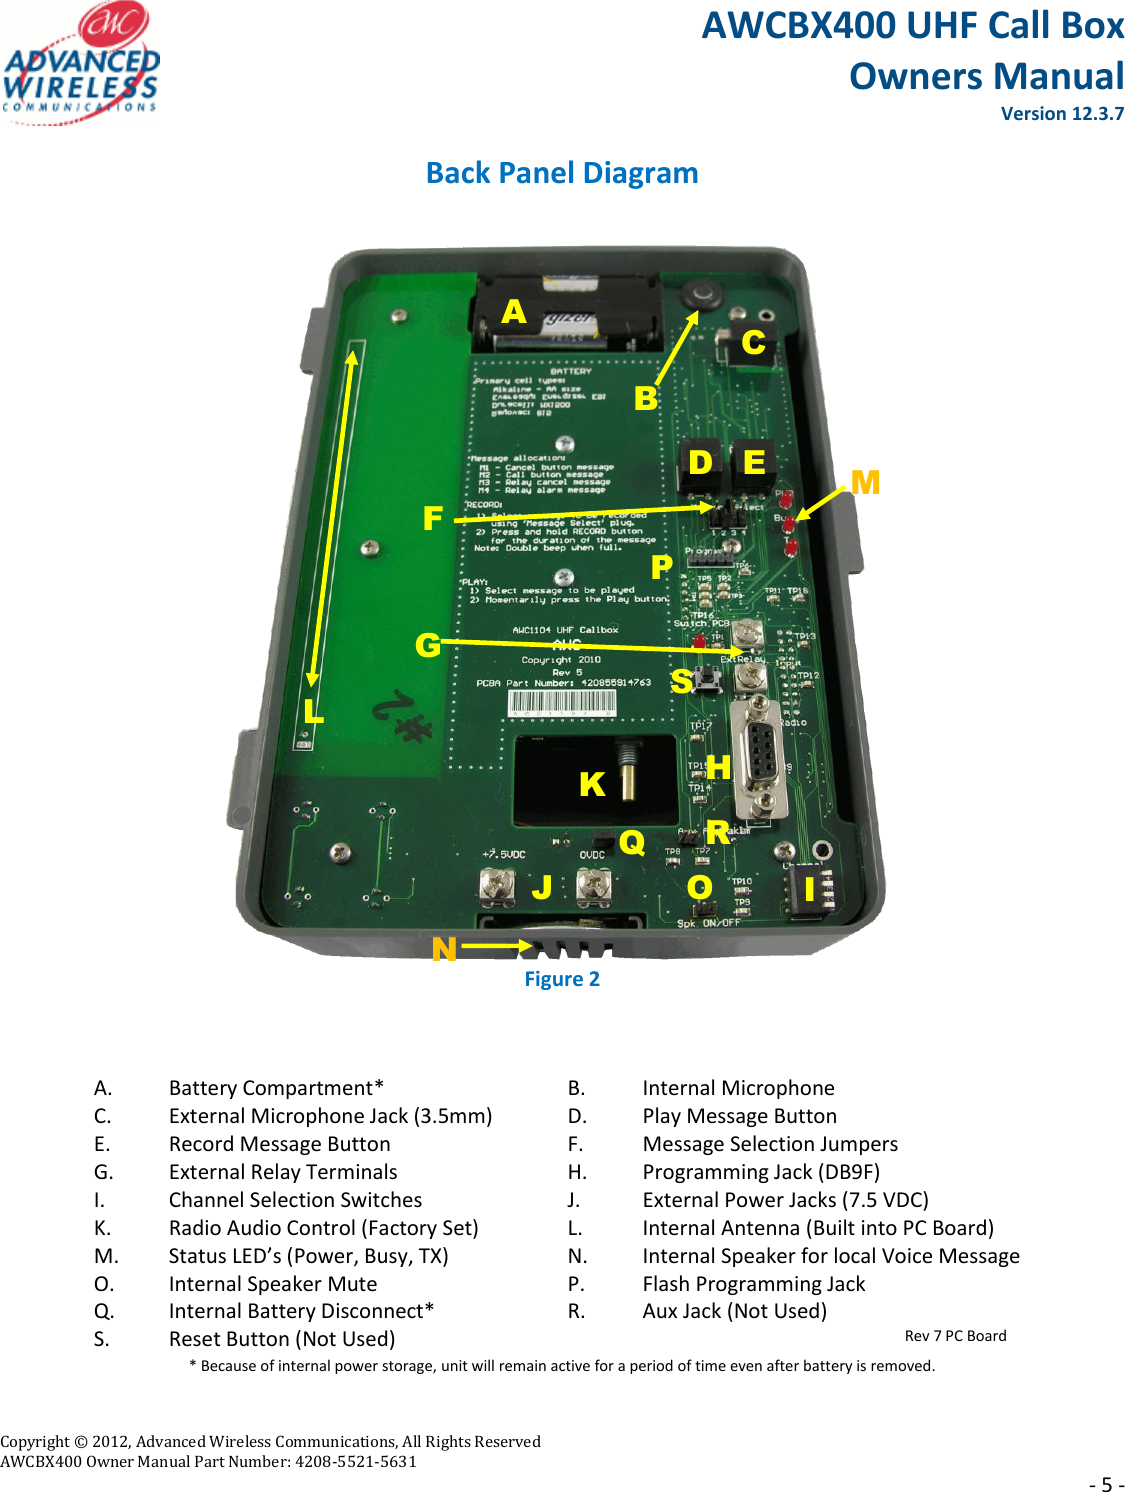 AWCBX400 UHF Call Box Owners Manual  Version 12.3.7   Copyright © 2012, Advanced Wireless Communications, All Rights Reserved  AWCBX400 Owner Manual Part Number: 4208-5521-5631     - 5 - Back Panel Diagram Figure 2      * Because of internal power storage, unit will remain active for a period of time even after battery is removed. A. Battery Compartment* B. Internal Microphone C. External Microphone Jack (3.5mm) D. Play Message Button E. Record Message Button F. Message Selection Jumpers G. External Relay Terminals H. Programming Jack (DB9F) I. Channel Selection Switches J. External Power Jacks (7.5 VDC) K. Radio Audio Control (Factory Set) L. Internal Antenna (Built into PC Board) M. Status LED’s (Power, Busy, TX) N. Internal Speaker for local Voice Message O. Internal Speaker Mute P. Flash Programming Jack Q. Internal Battery Disconnect* R. Aux Jack (Not Used) S. Reset Button (Not Used)                                                                  Rev 7 PC Board A B C D E F P G H I J O L N M K Q R S 